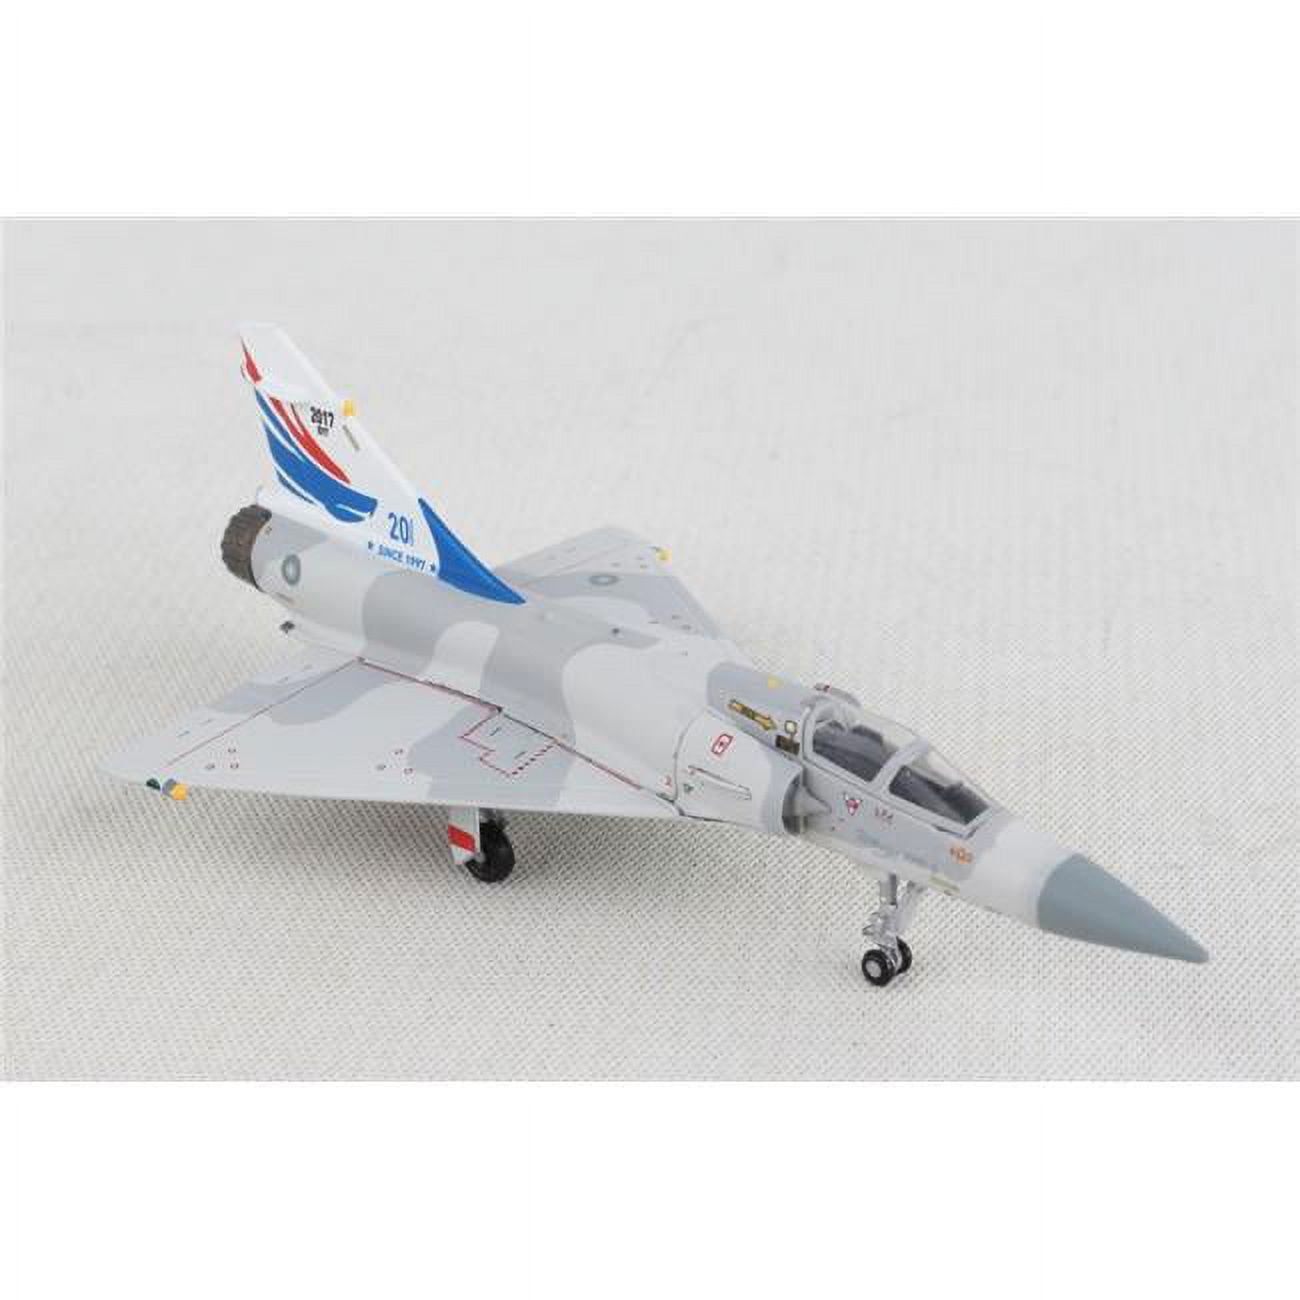 Hogan Wings Hg60562 1 By 200 Scale Rocaf Mirage 2000 20th Anniversary Model Airplane